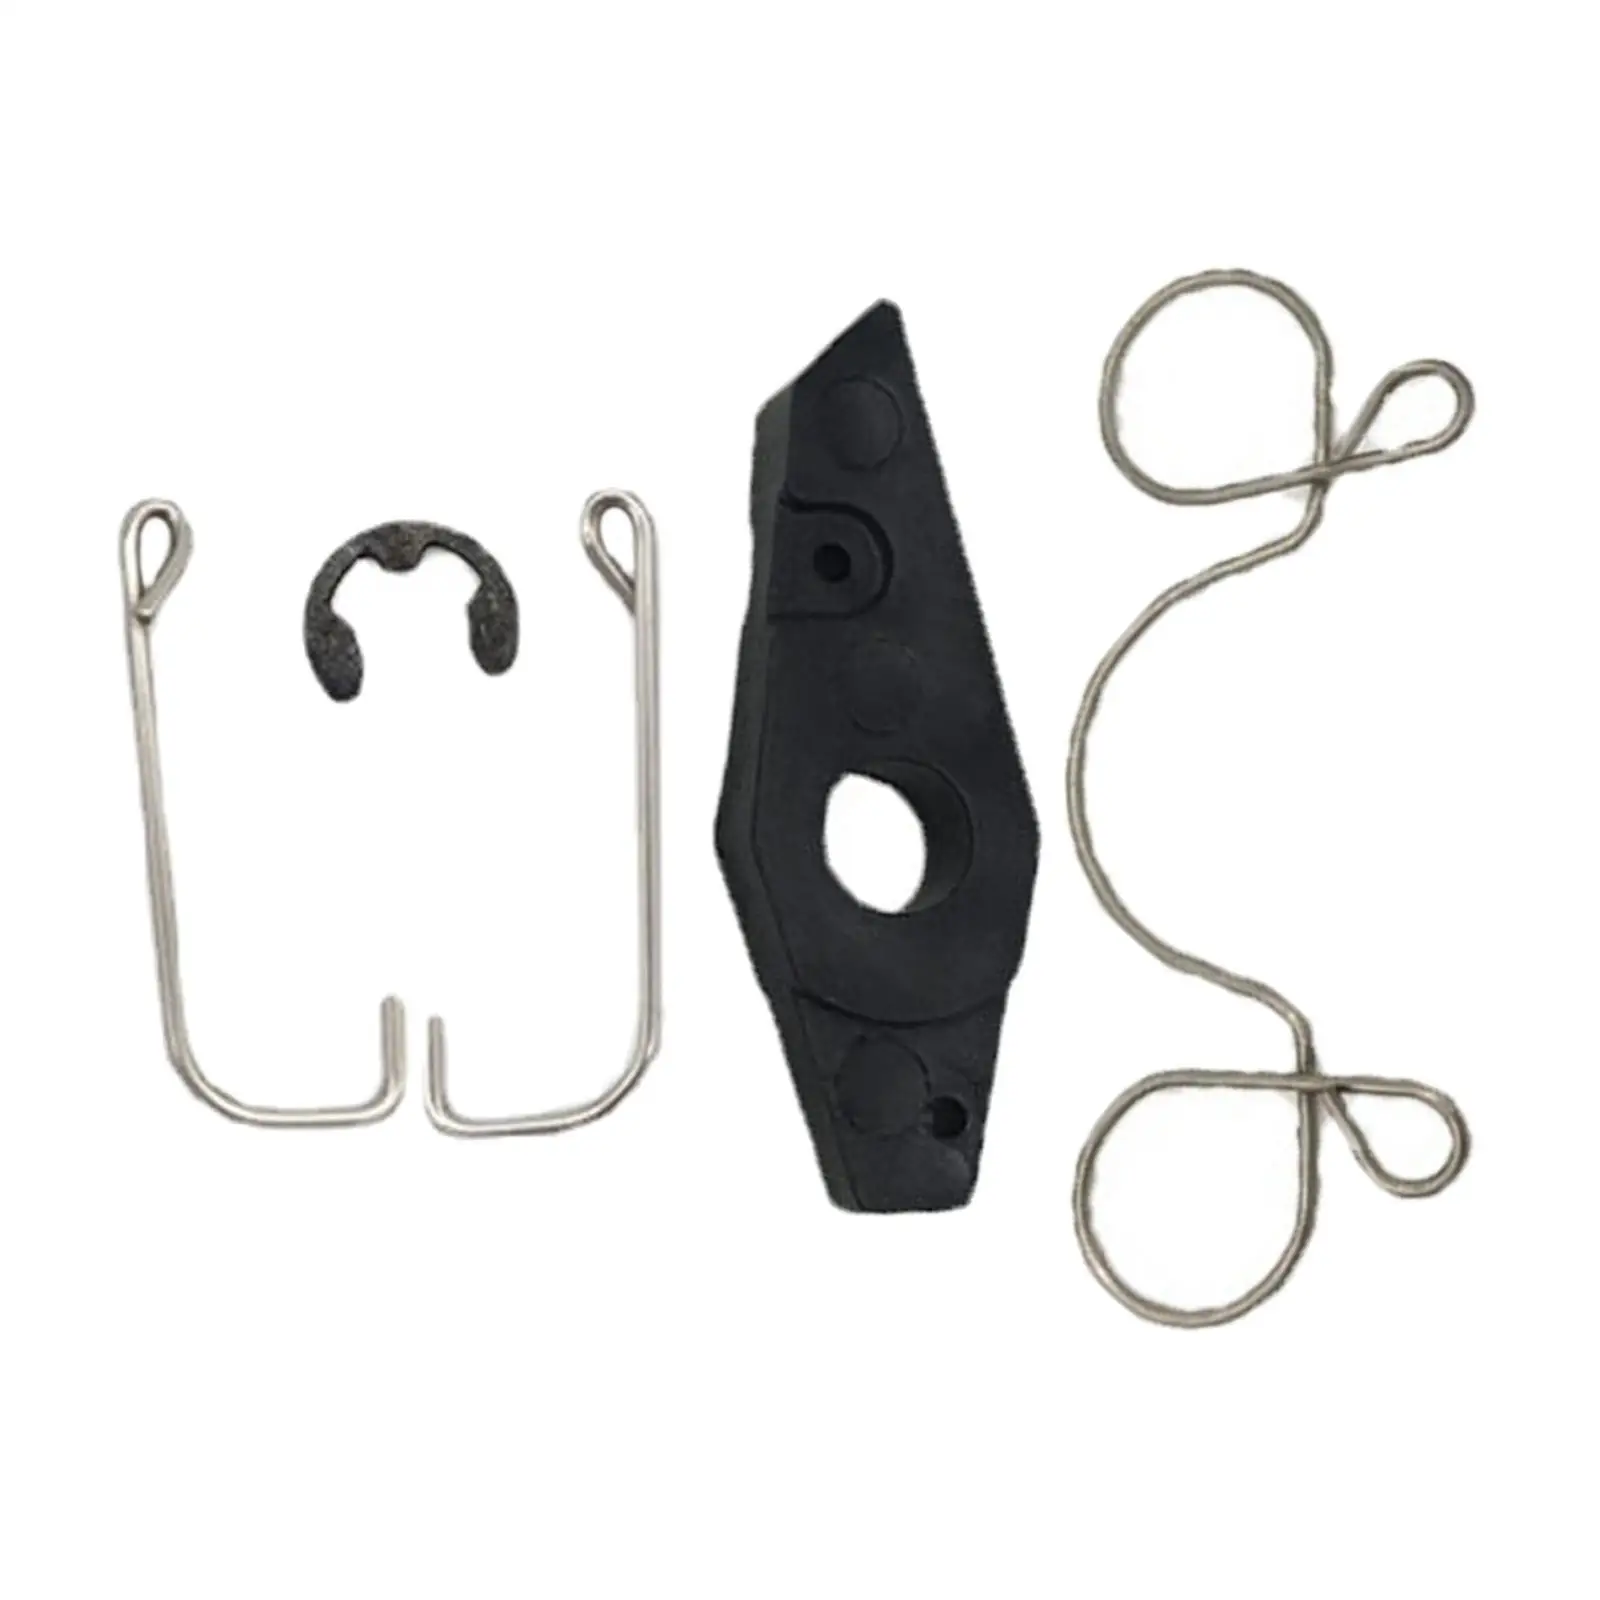 Pull Start Repair Tools Replaces Premium for  Outboard 2-Storke